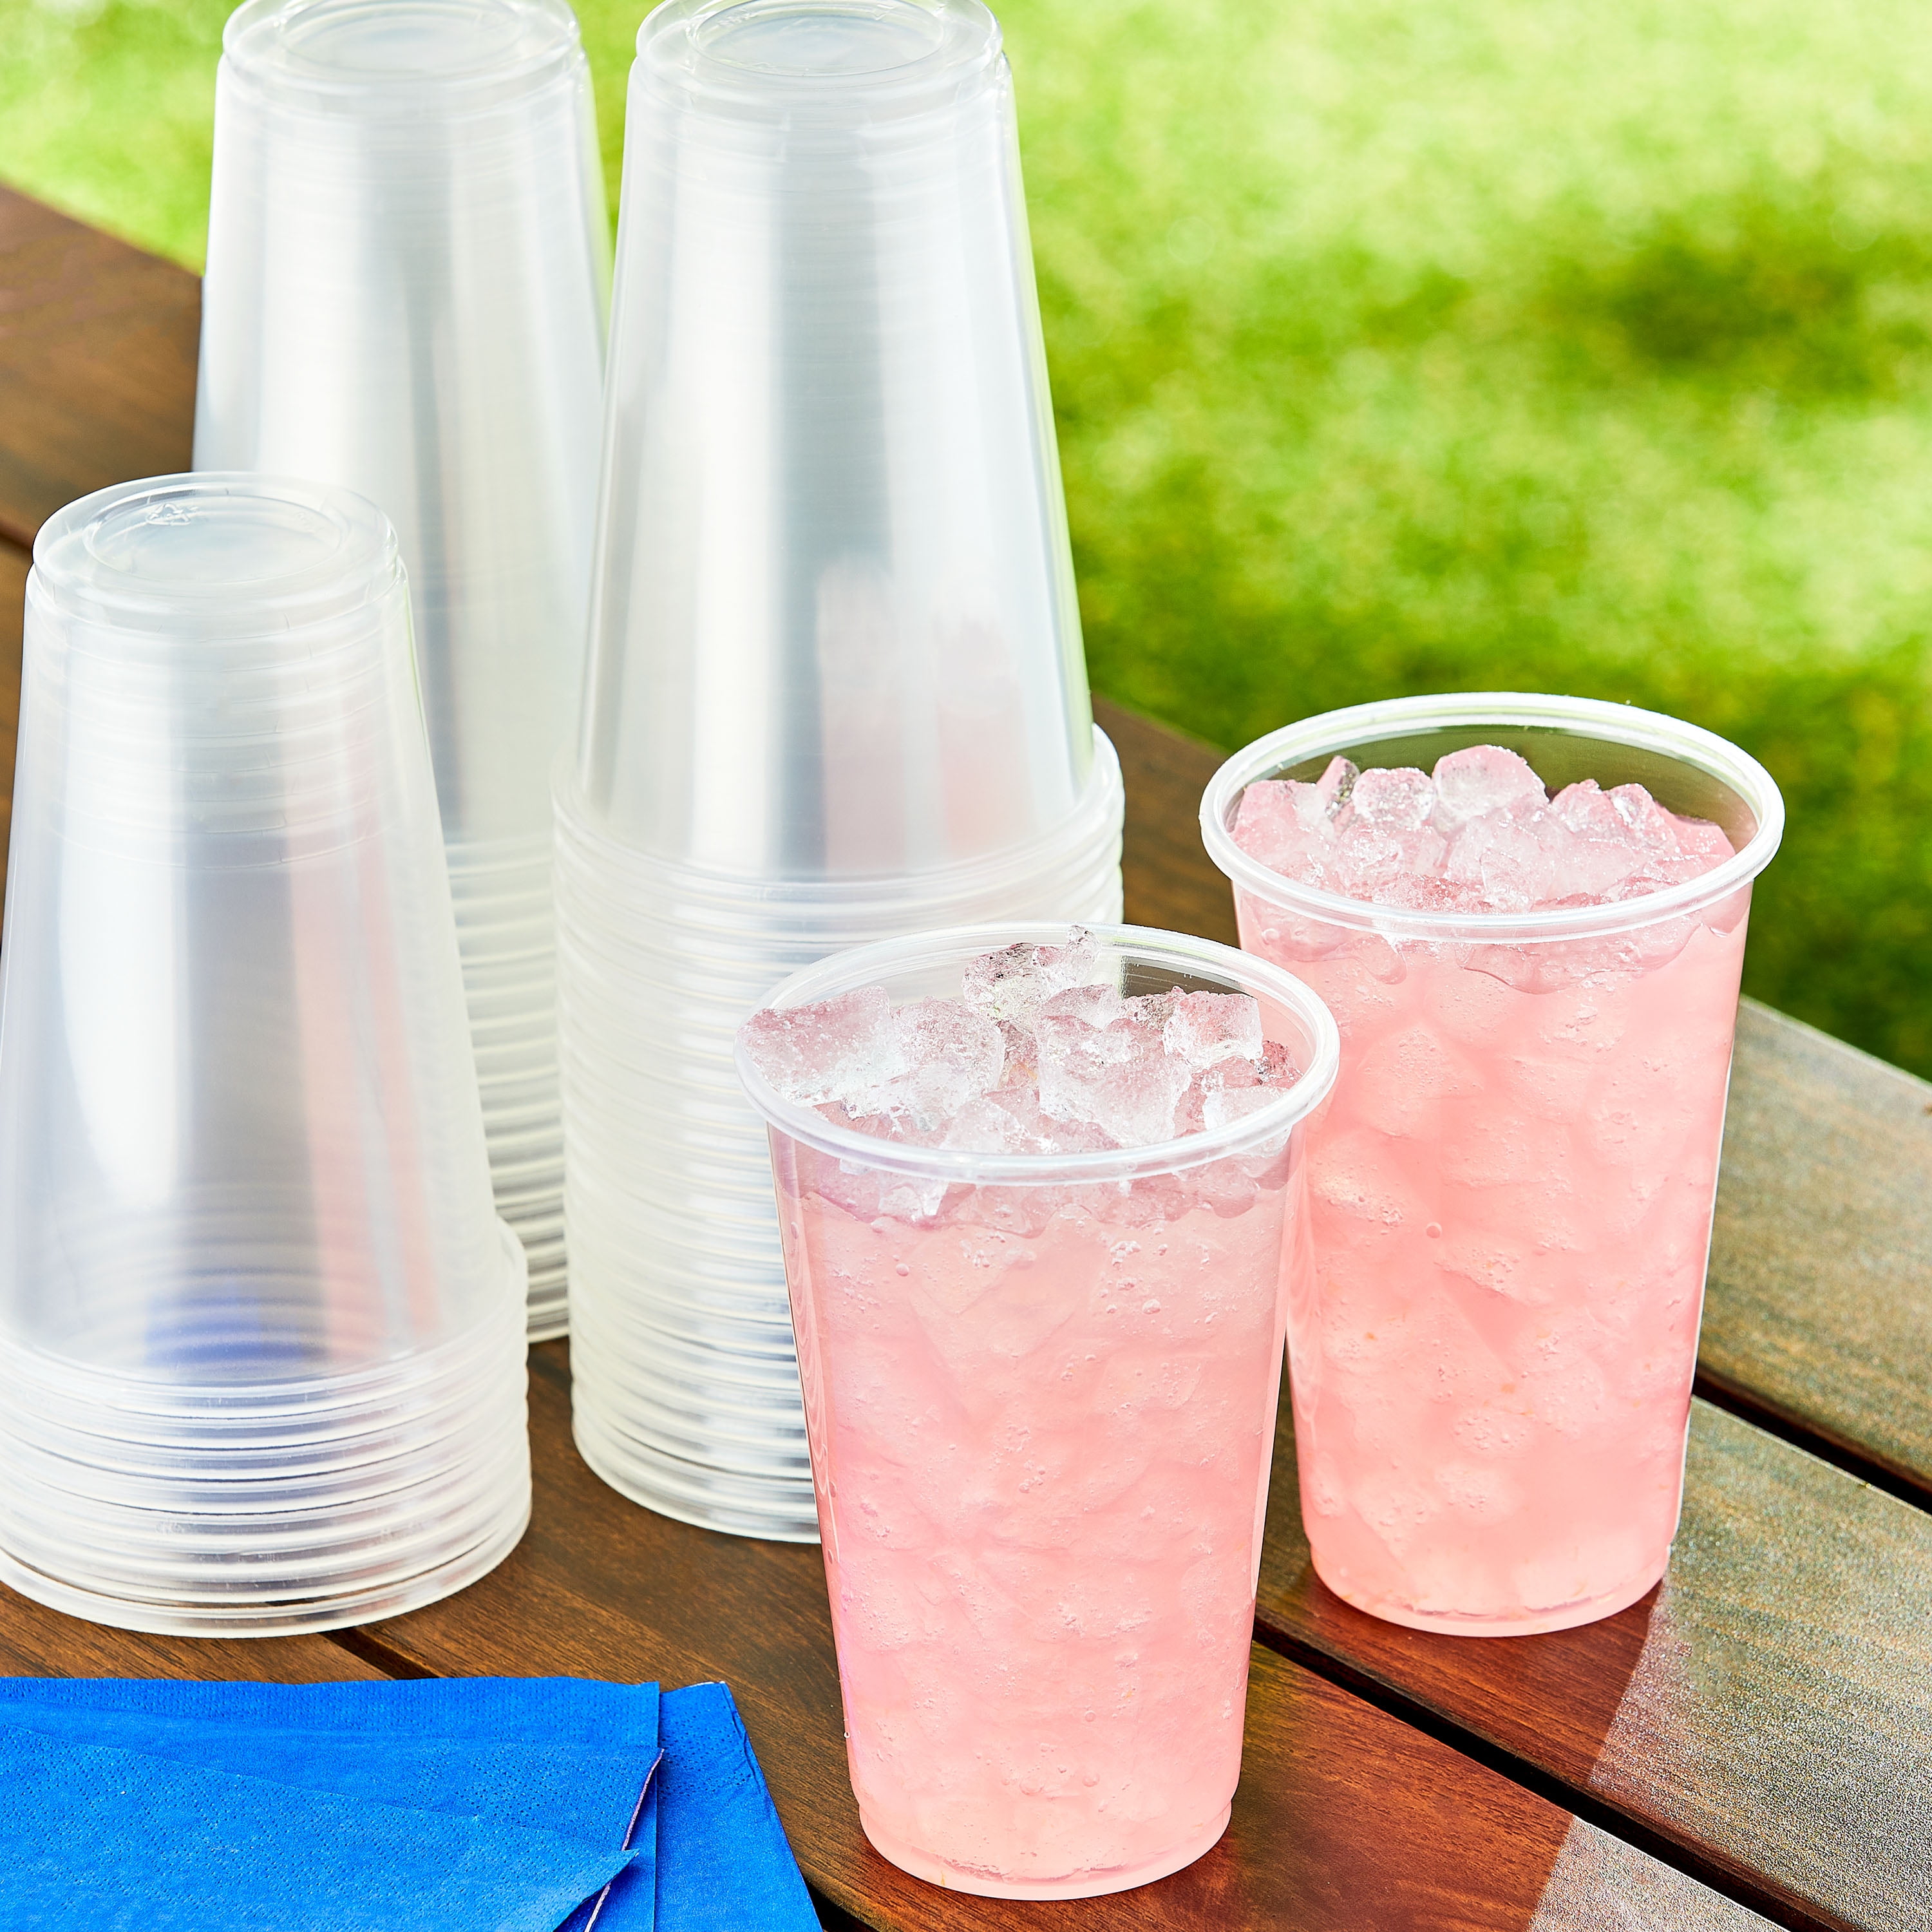 7 Oz. Clear Plastic Cups - 100 Ct.